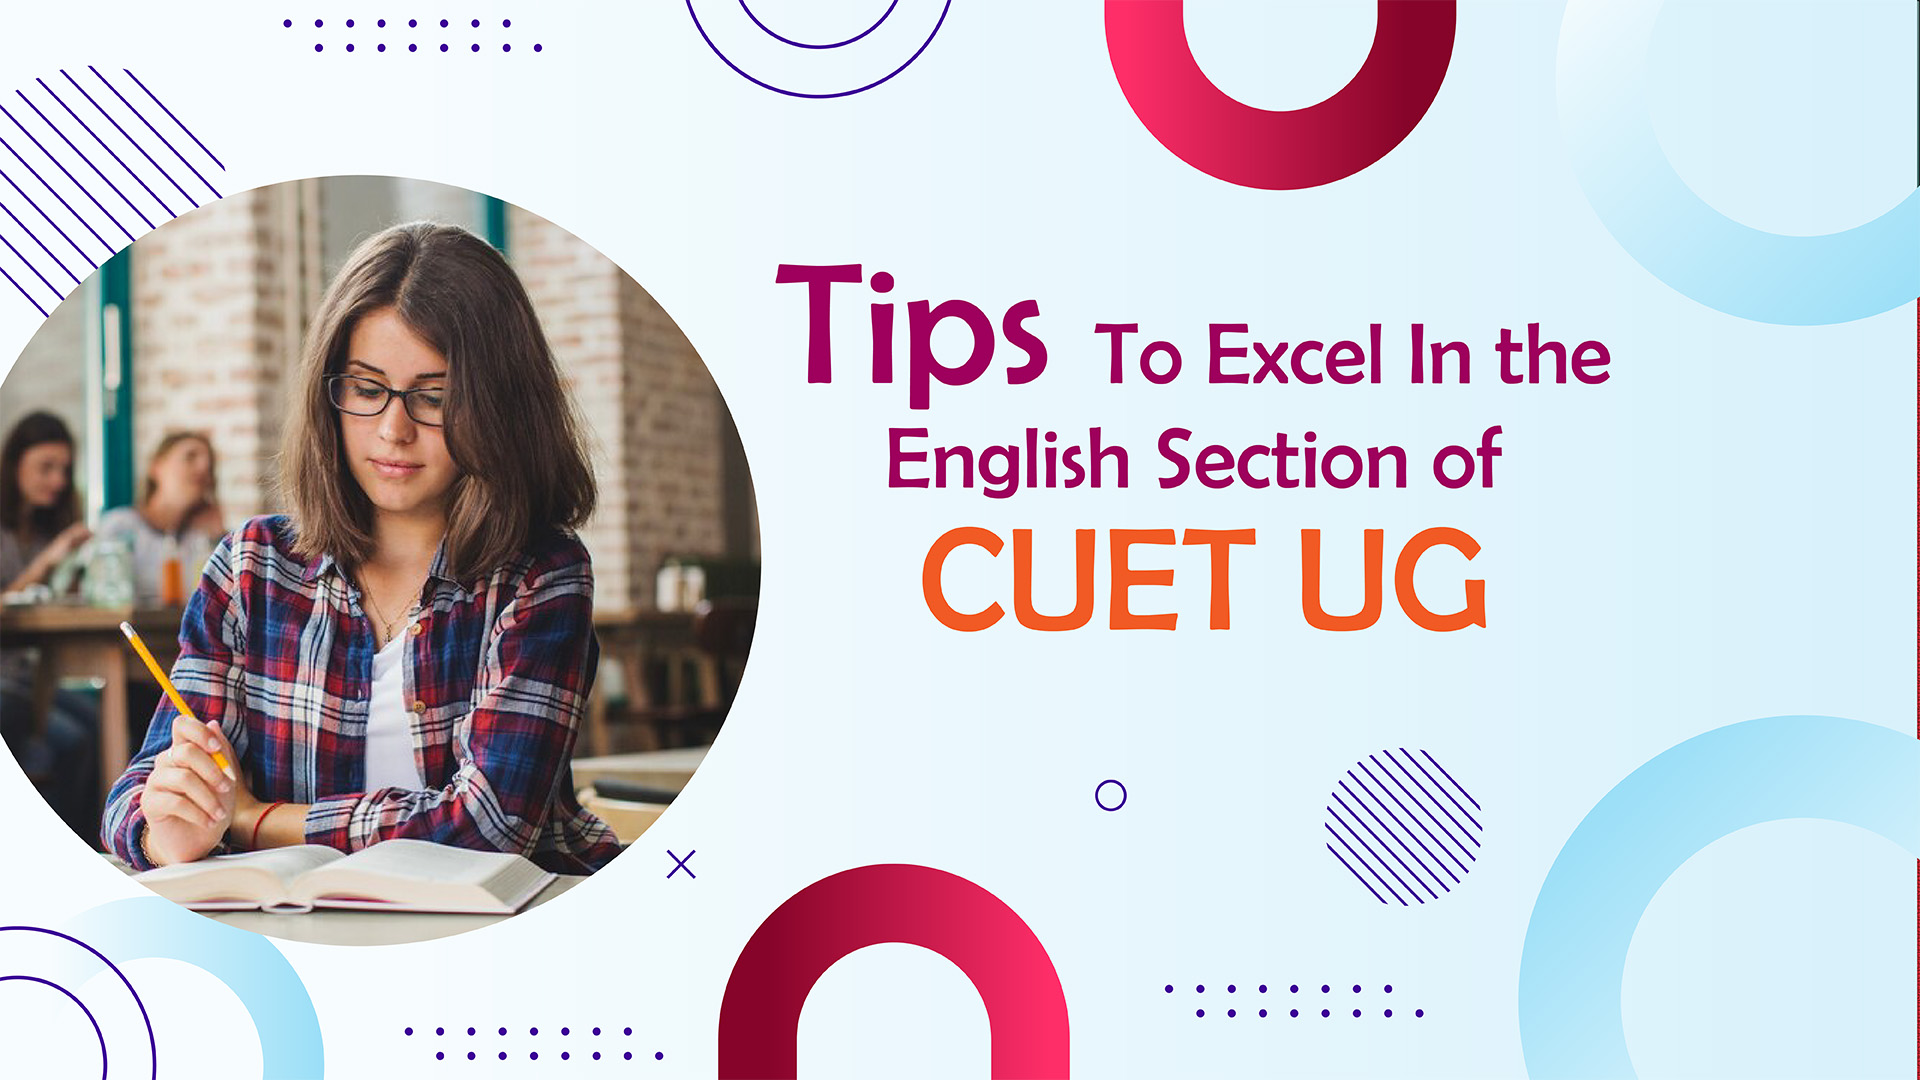 Tips To Excel In the English Section of CUET UG